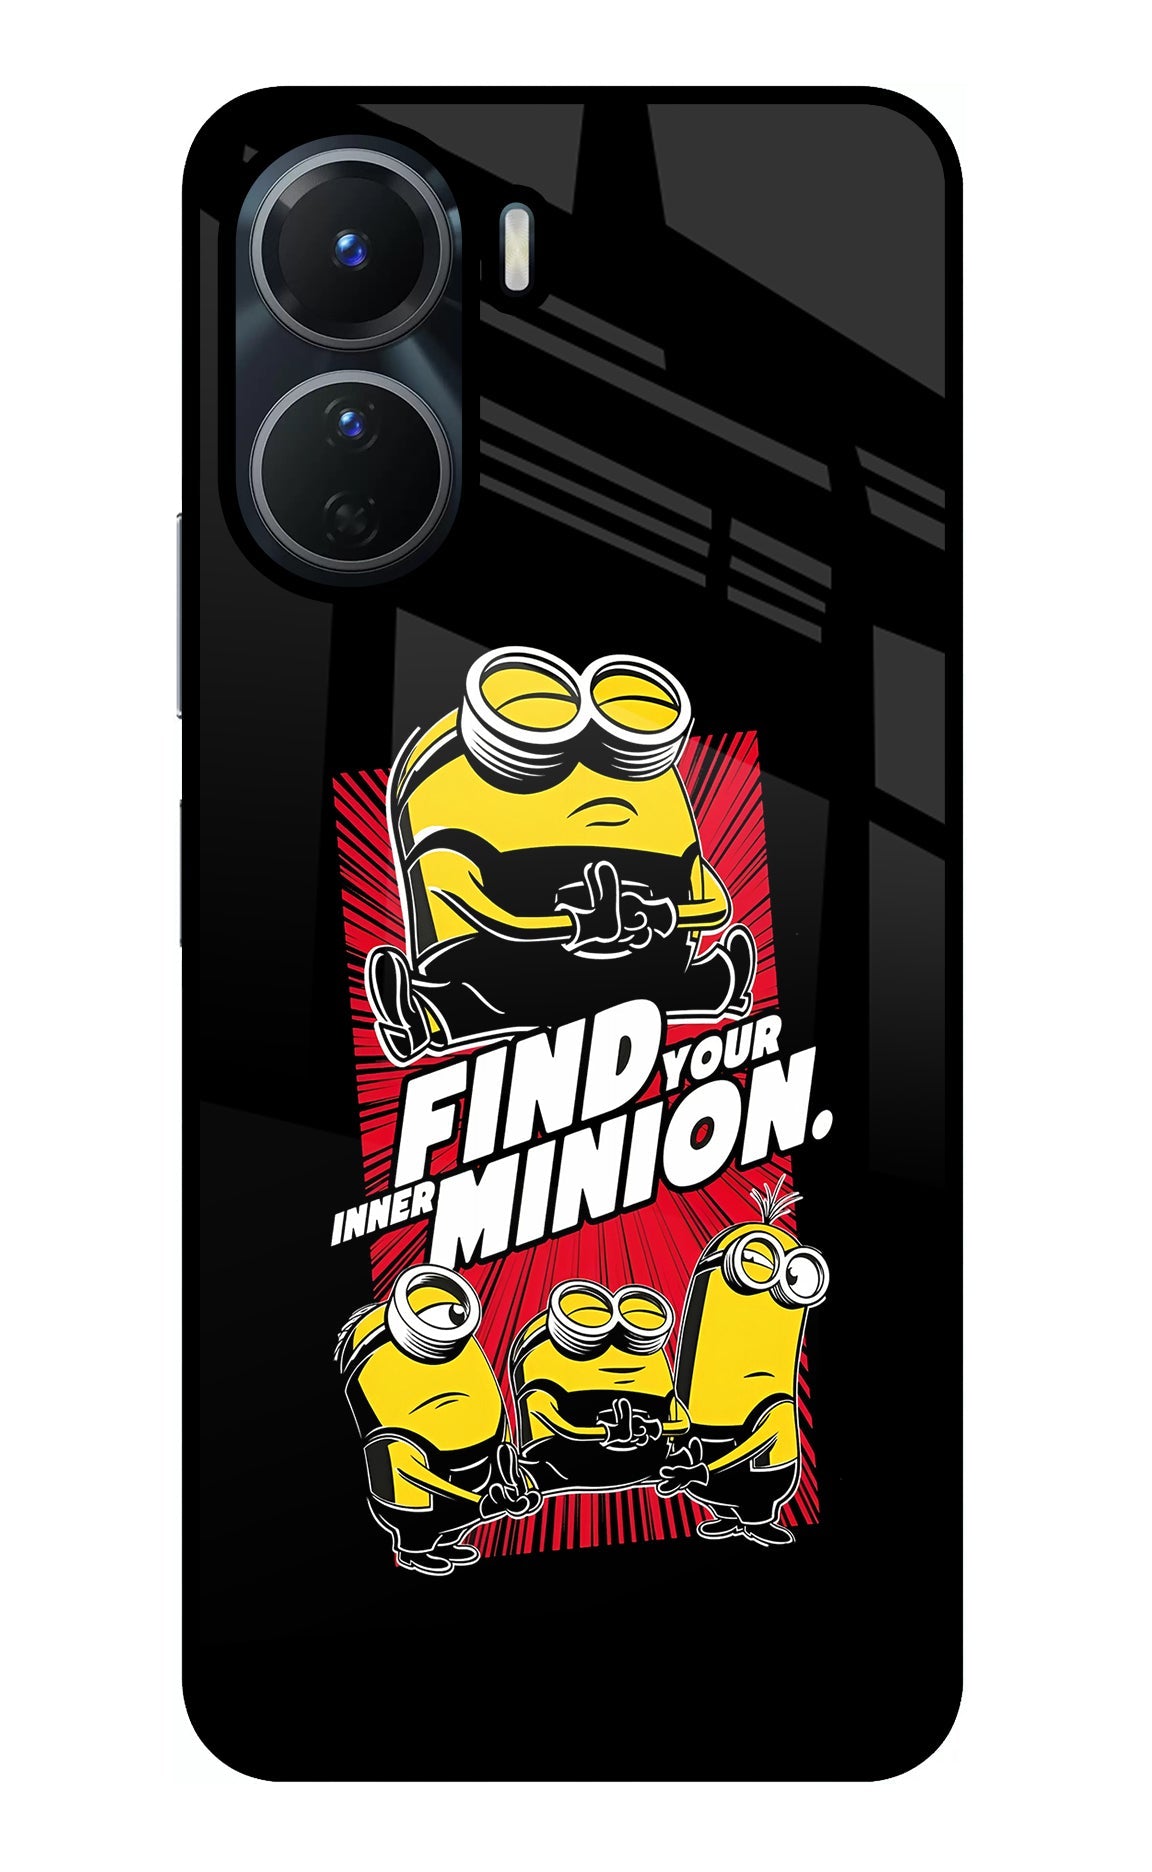 Find your inner Minion Vivo Y16 Back Cover